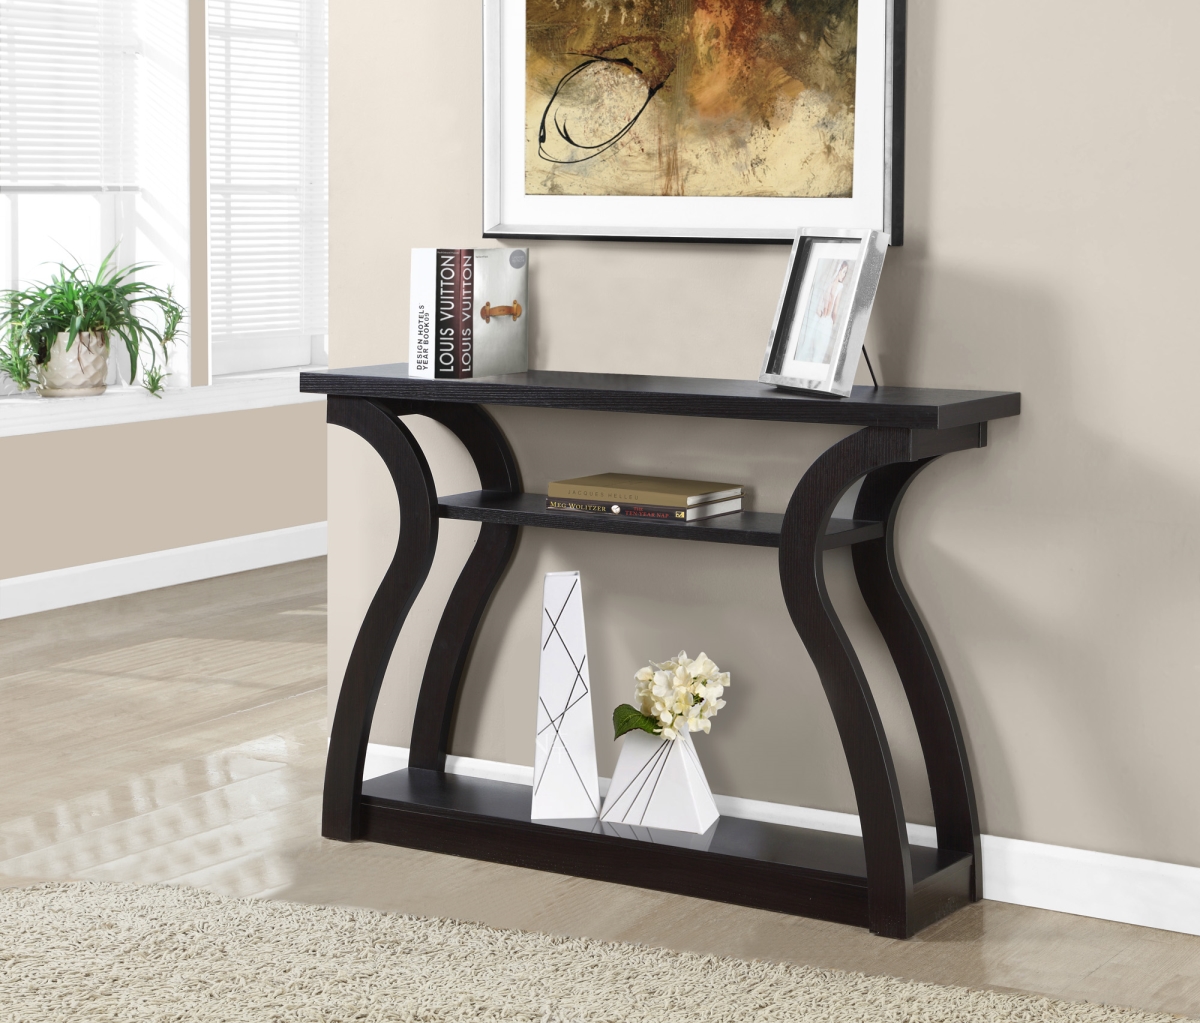 I 2445 47 In. Hall Console Accent Table - Cappuccino